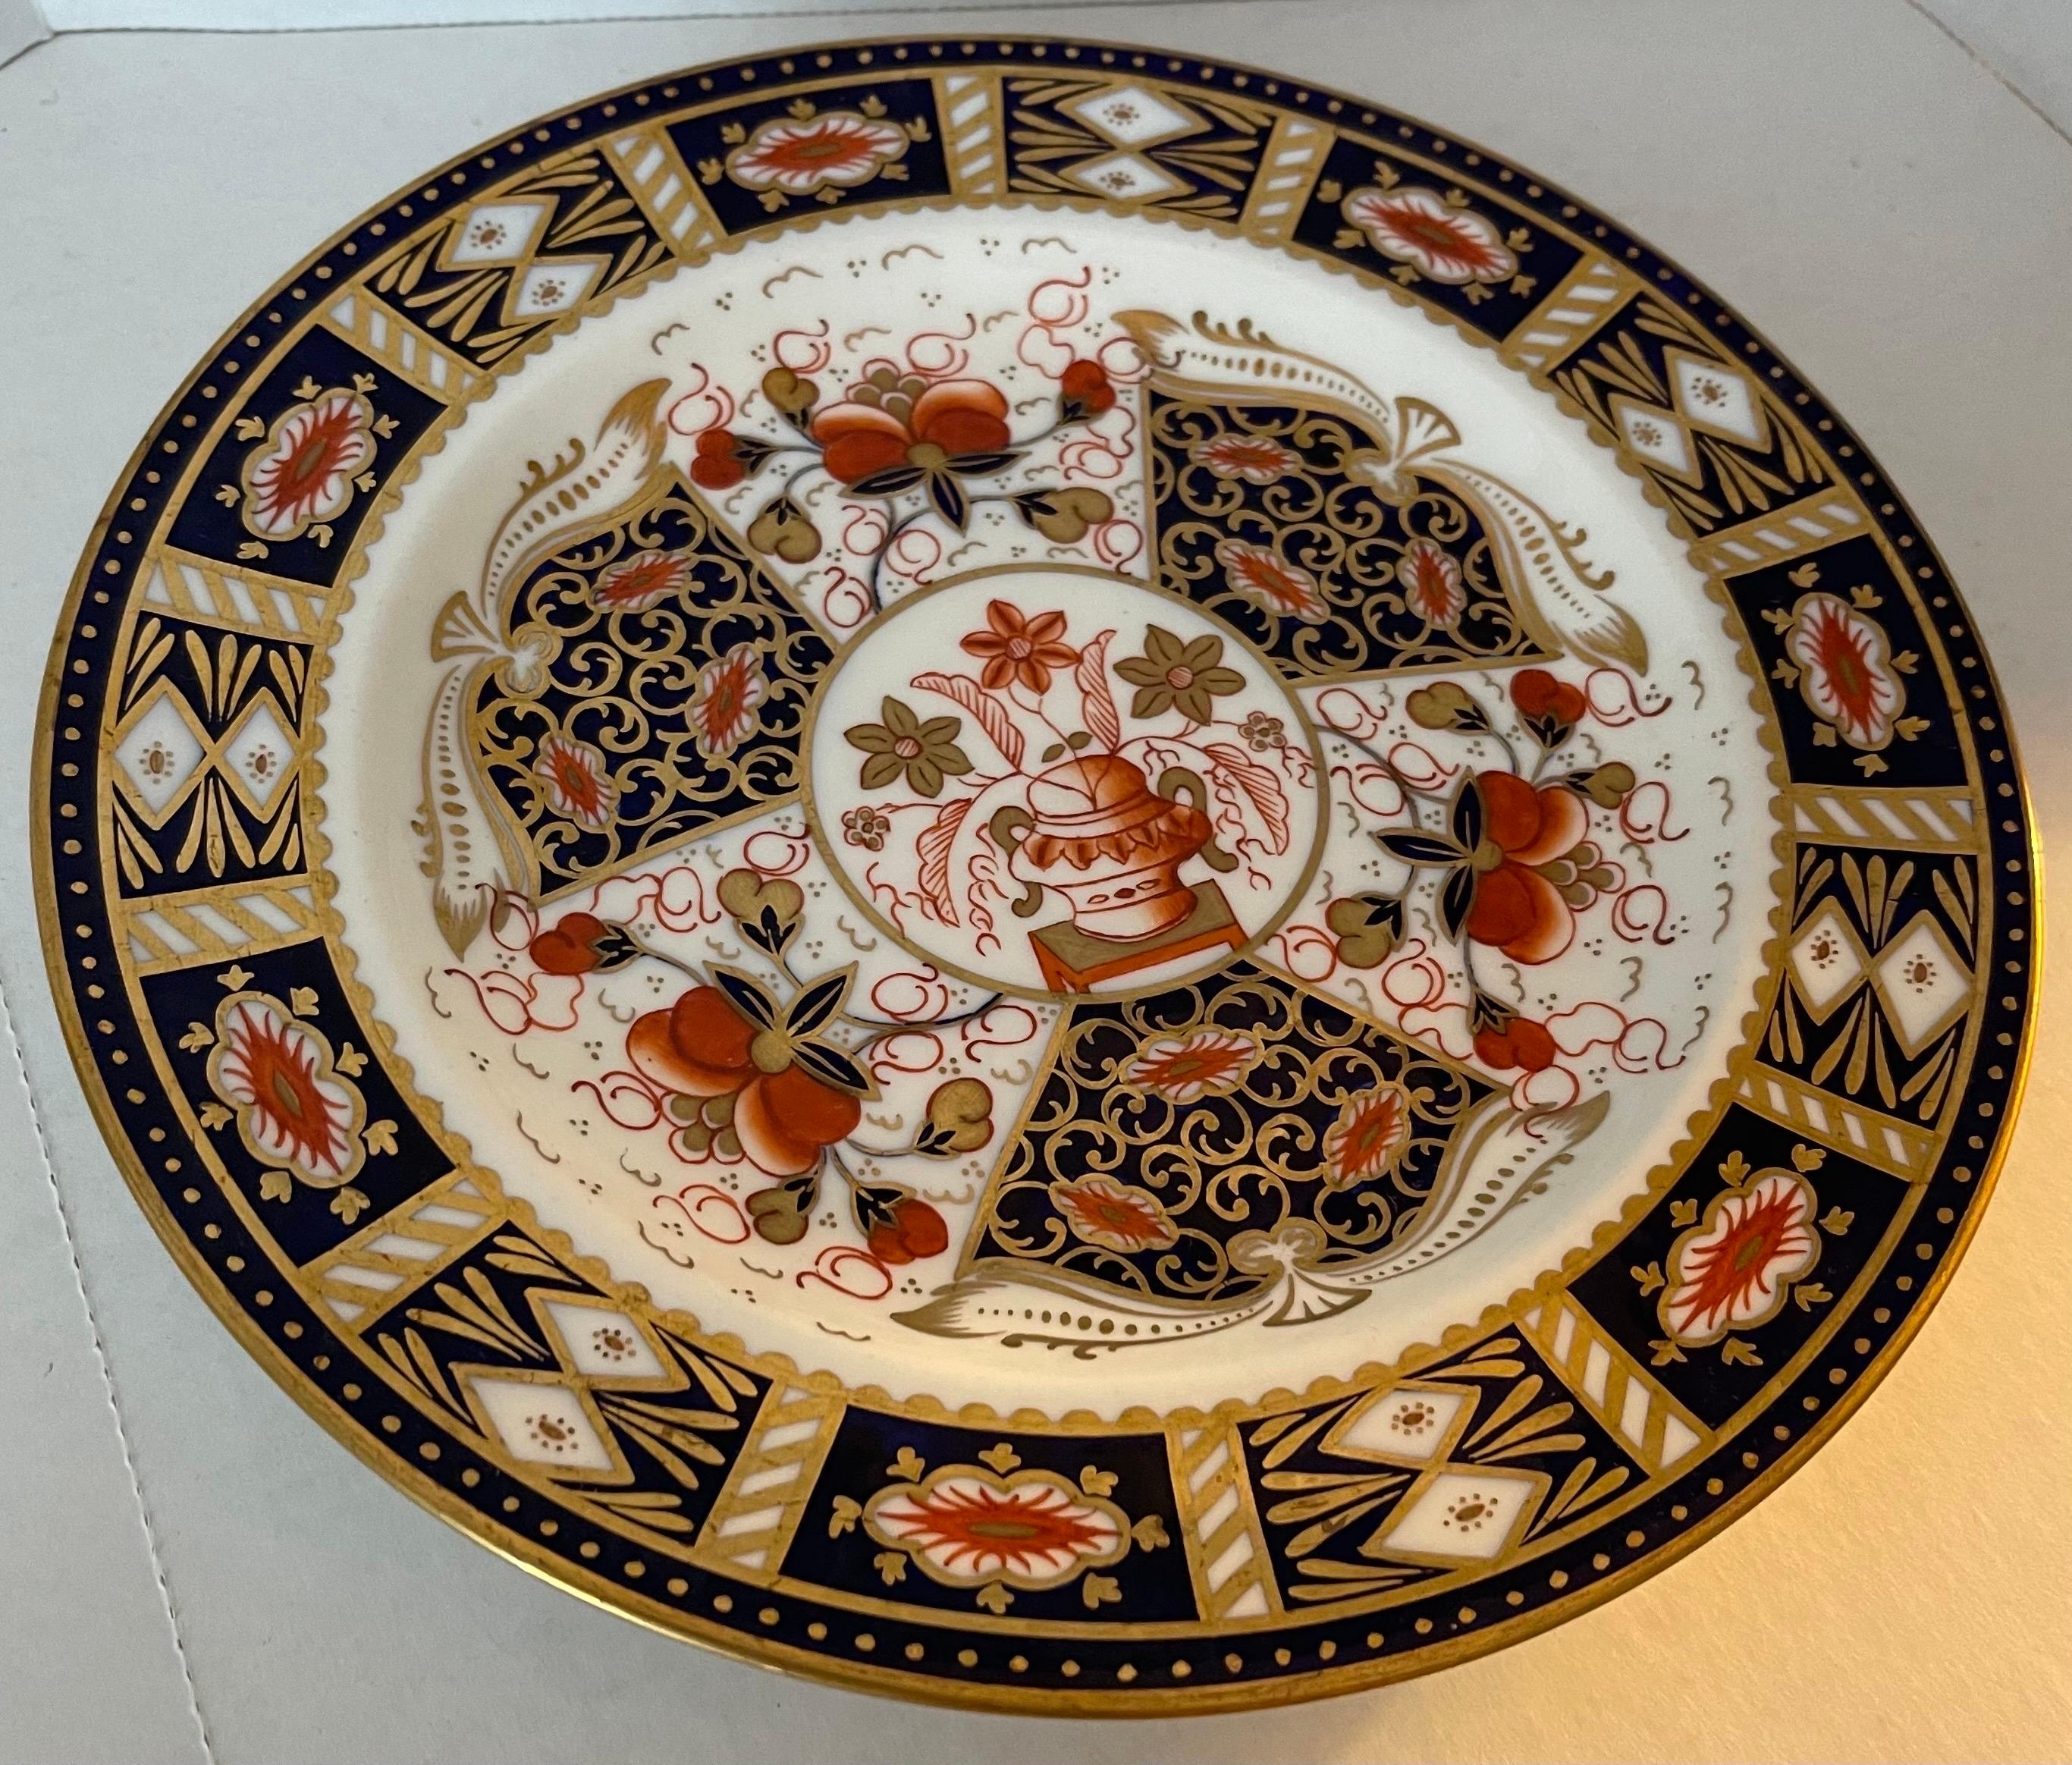 1950s Wedgwood Imari pattern dinner plate. Stamped Wedgwood on the underside. Made for William H. Plummer & Co. in New York City. 